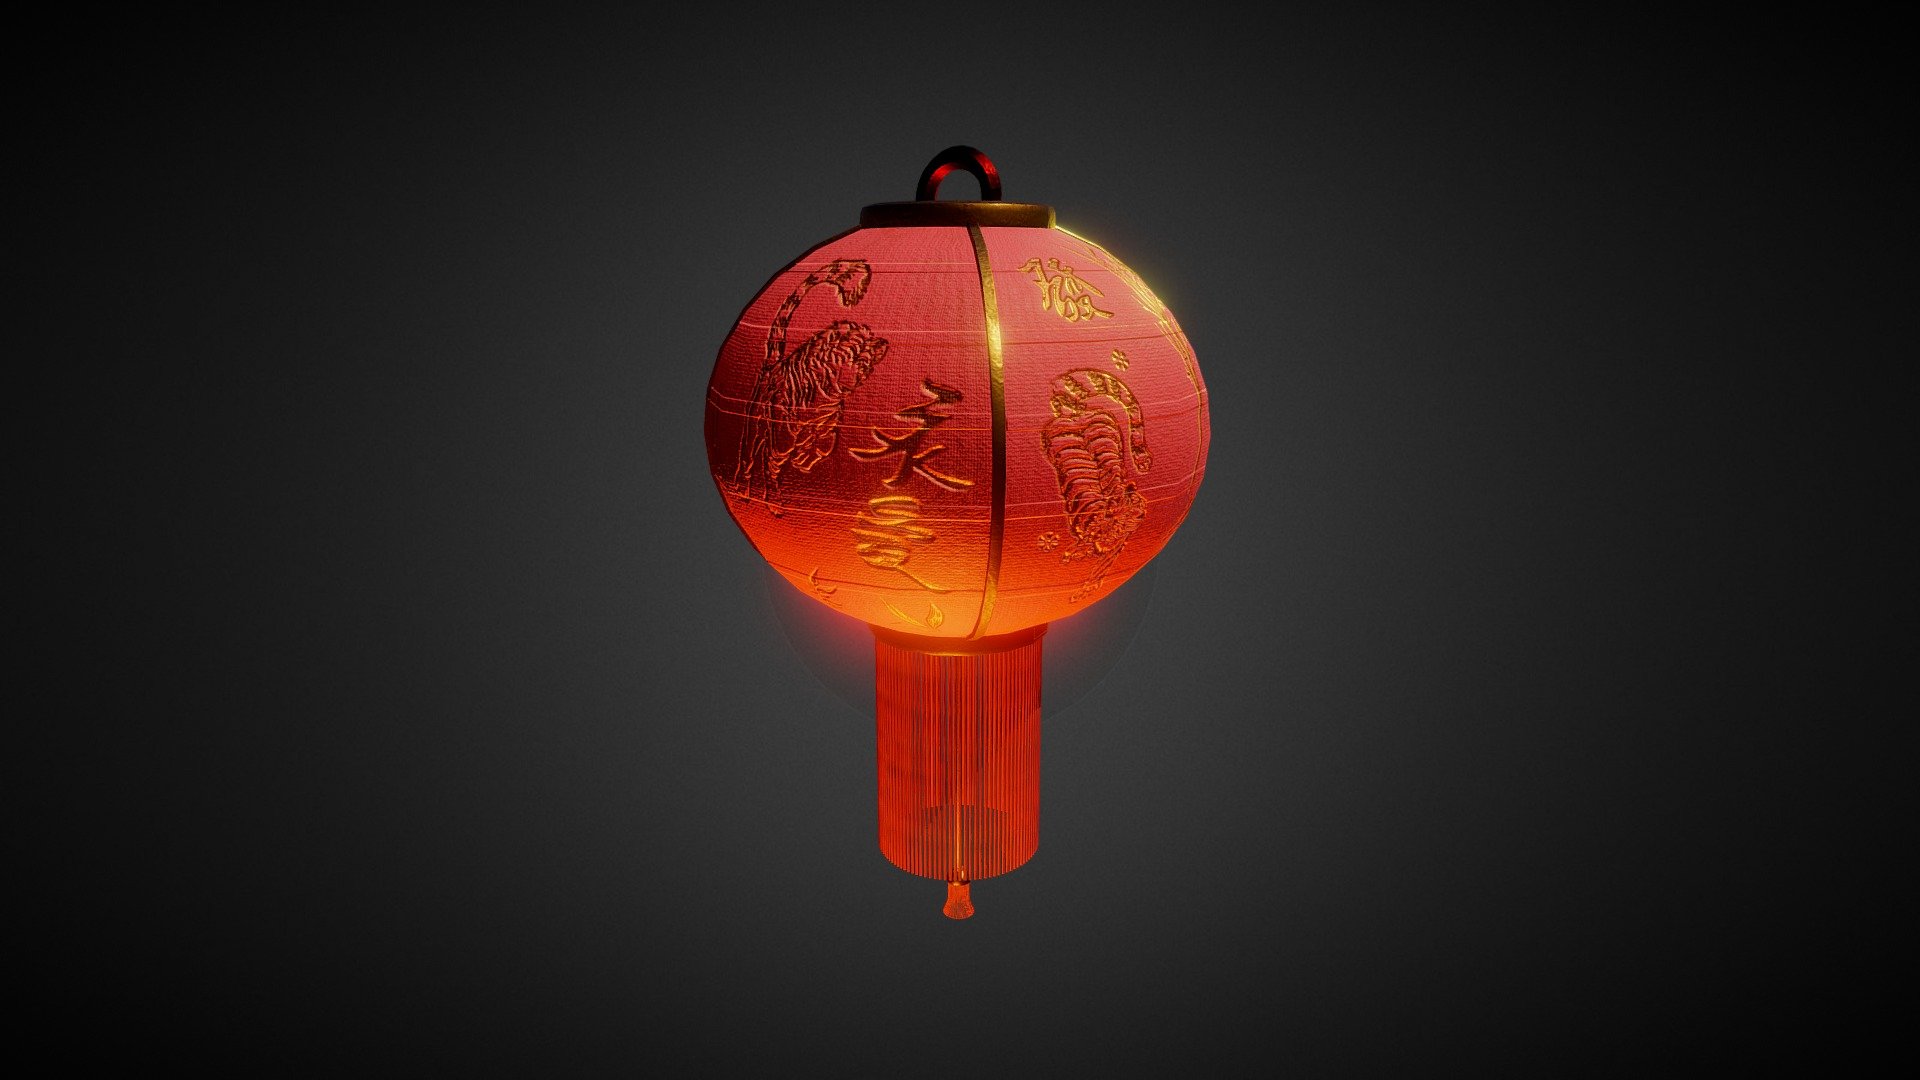 Revised Chinese New Year paper lantern created for the DiNusty Empire monthly prop challenge.
Stencil designs created by;

Charley C on Artstation - https://www.artstation.com/charleyc 

Ponyo on Instagram - https://www.instagram.com/ponyo5191/

Thank you both for your help with this asset! - Chinese Lantern | DiNusty Empire Challenge - 3D model by Maxwell Walton (@MaxwellWalton) 3d model